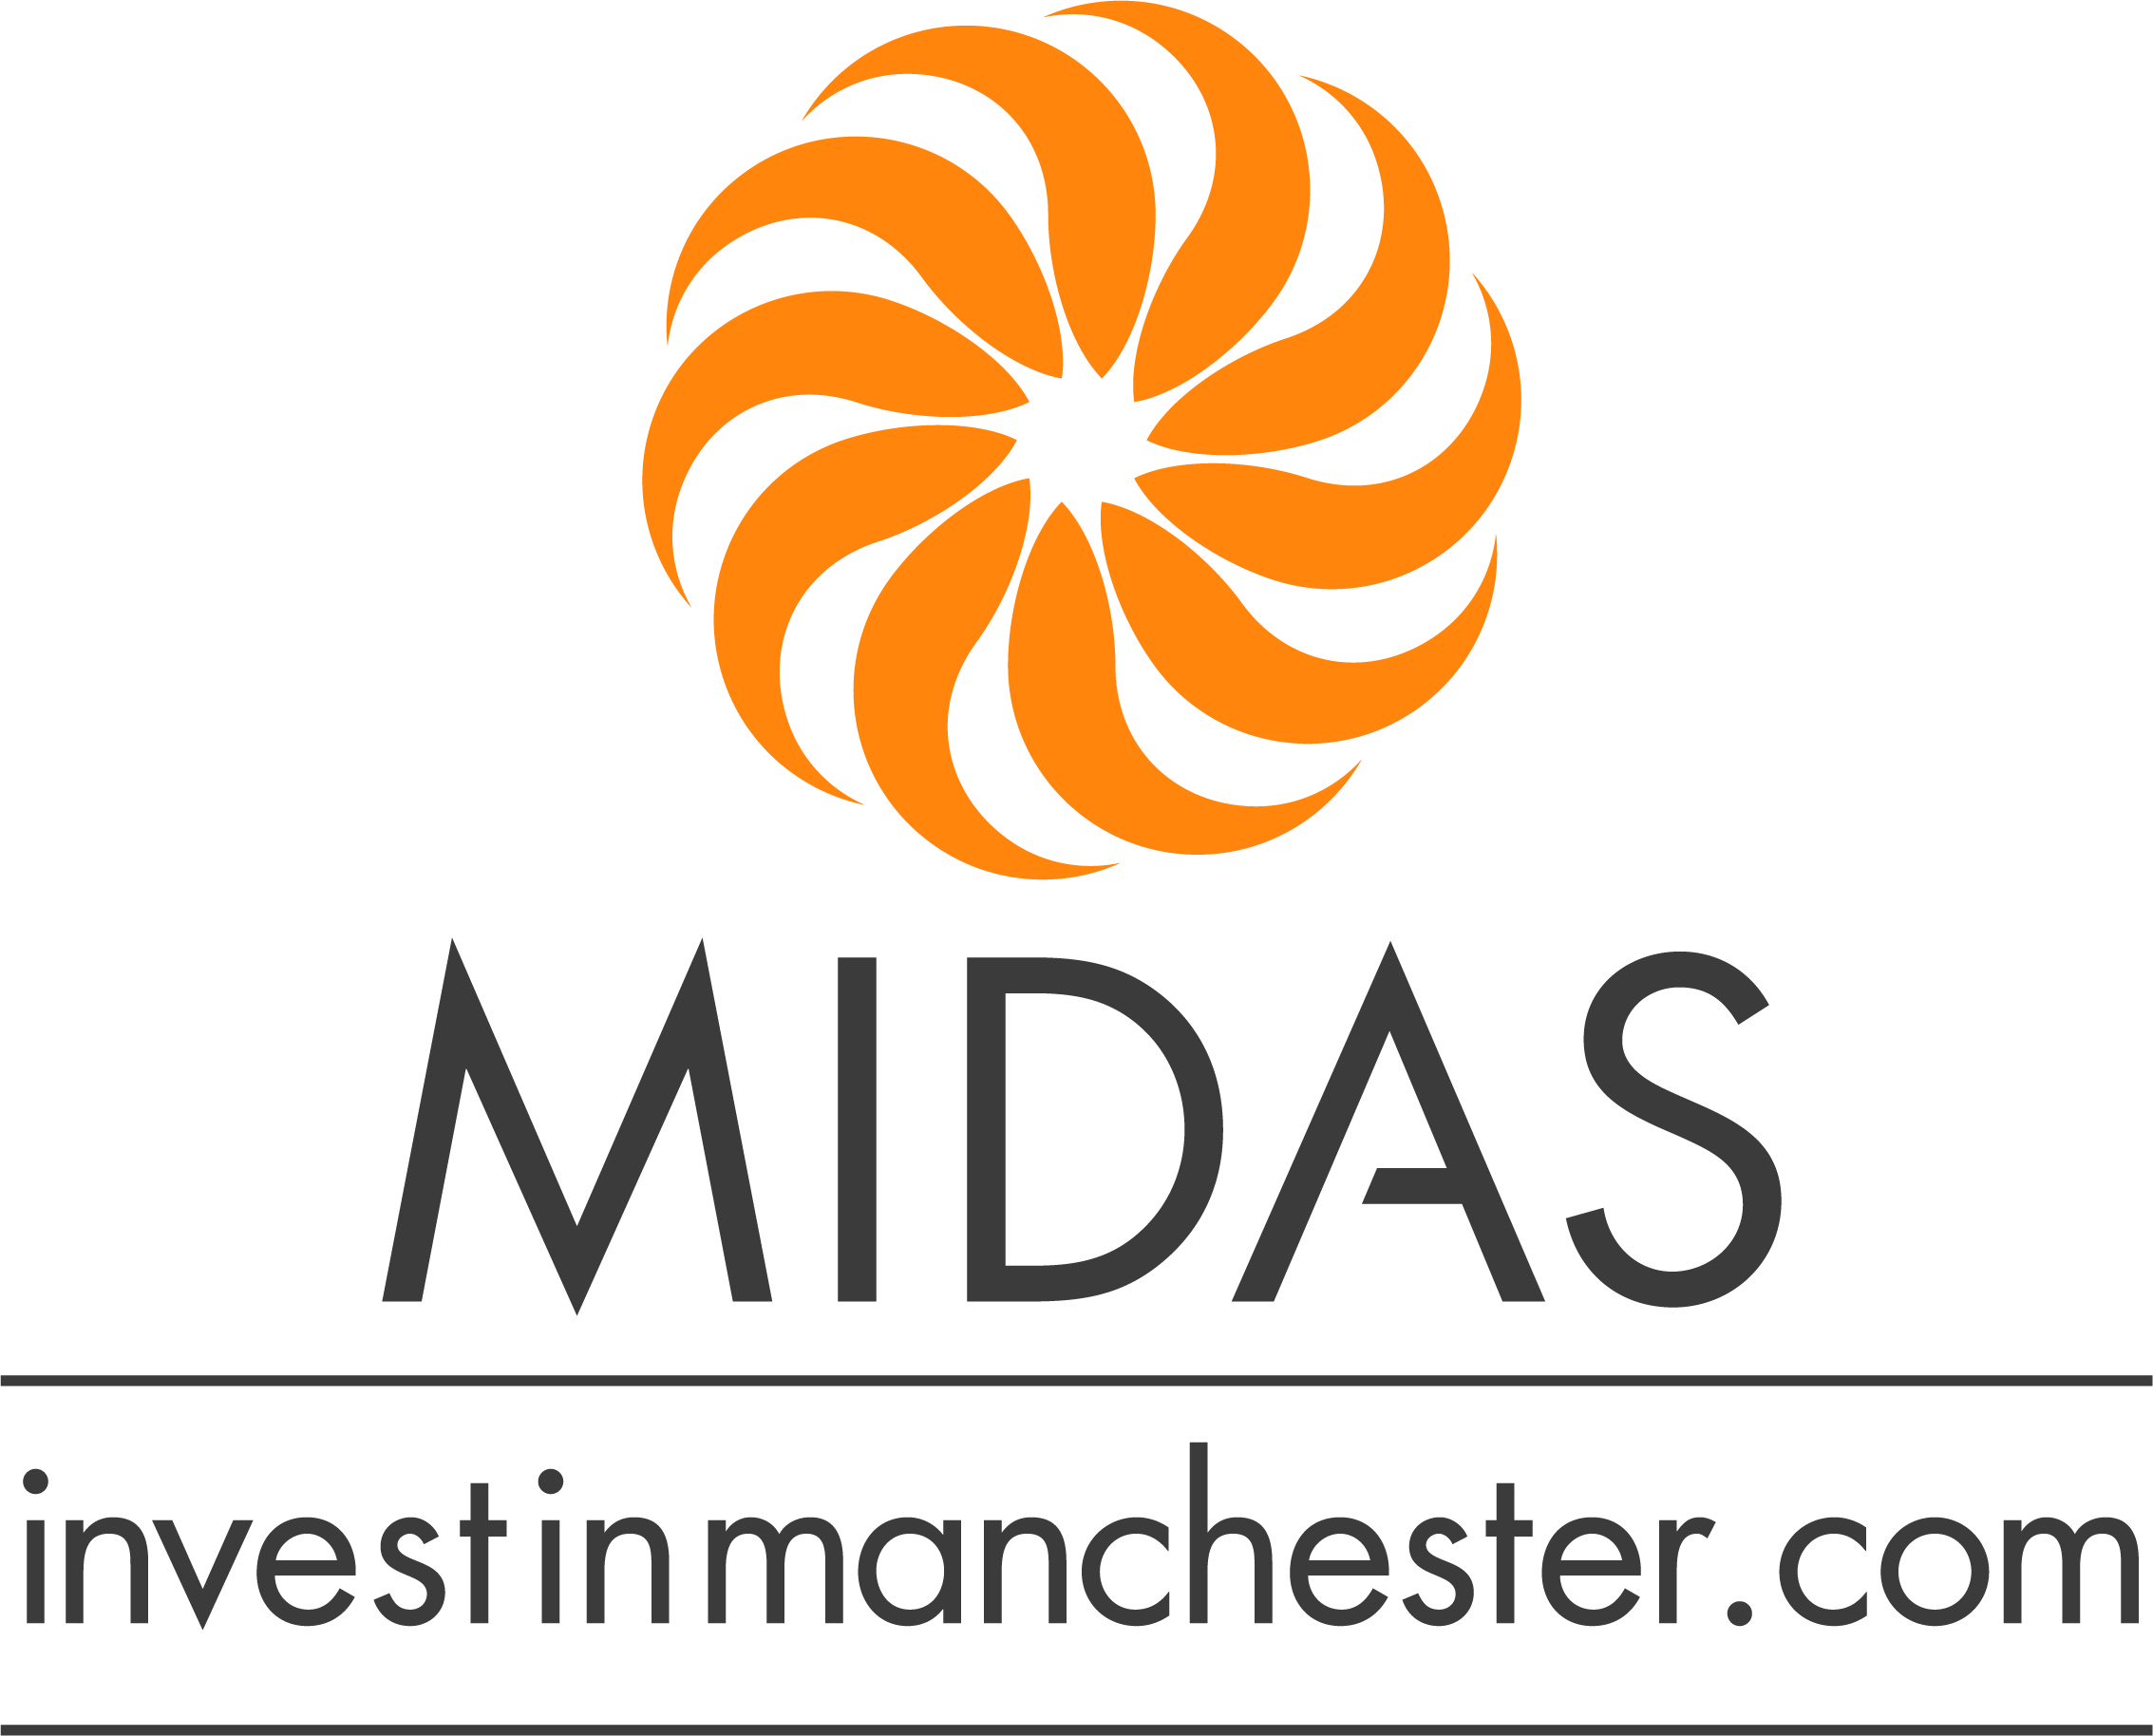 MIDAS – Manchester’s Inward Investment Agency